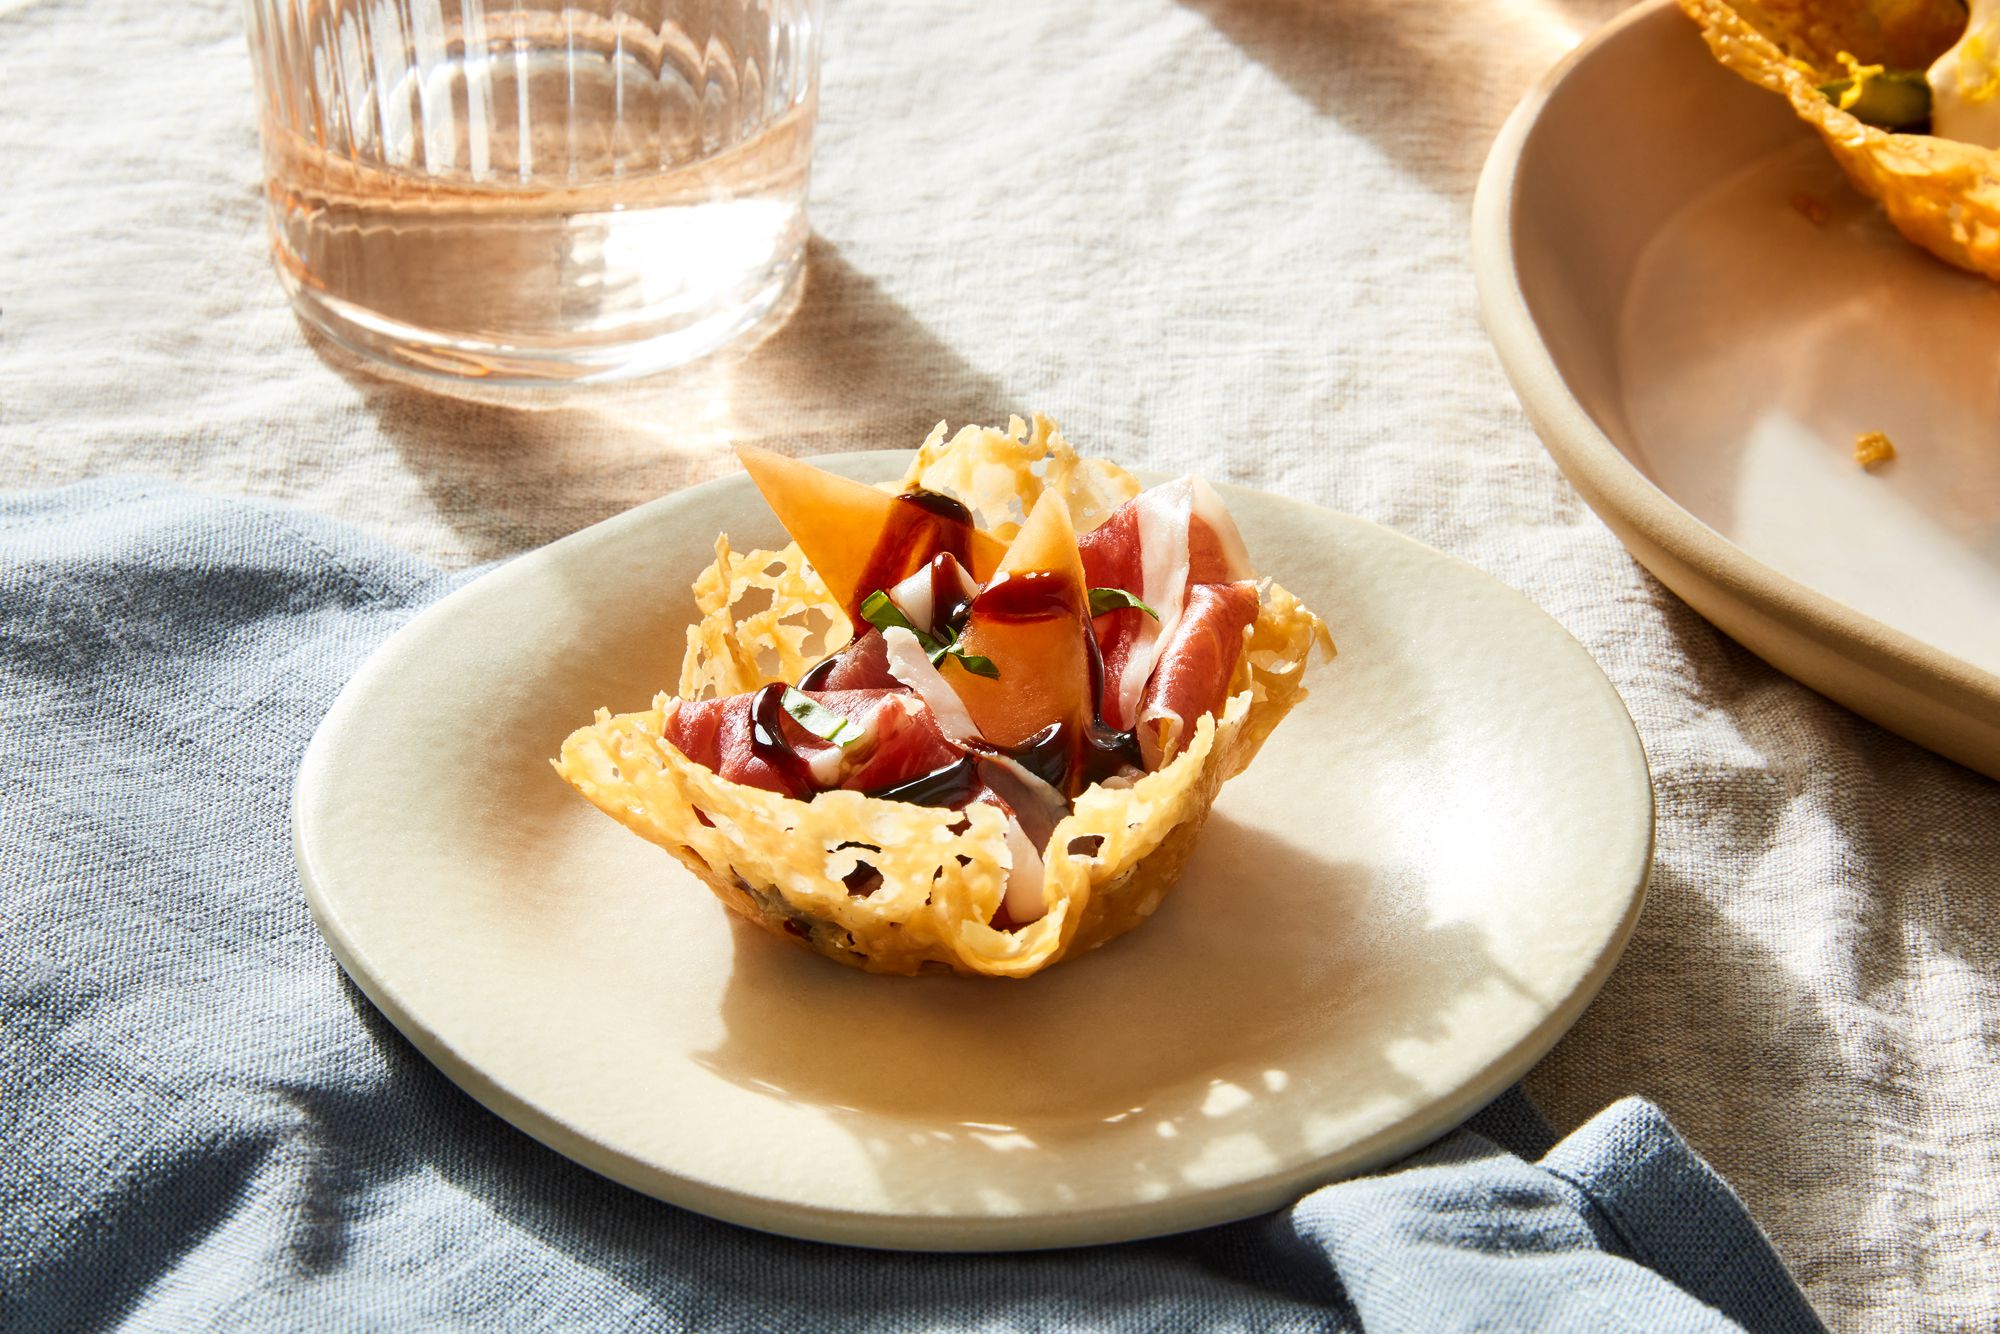 Crispy Parmigiano Reggiano Cups = Your New Fave Summer Snack